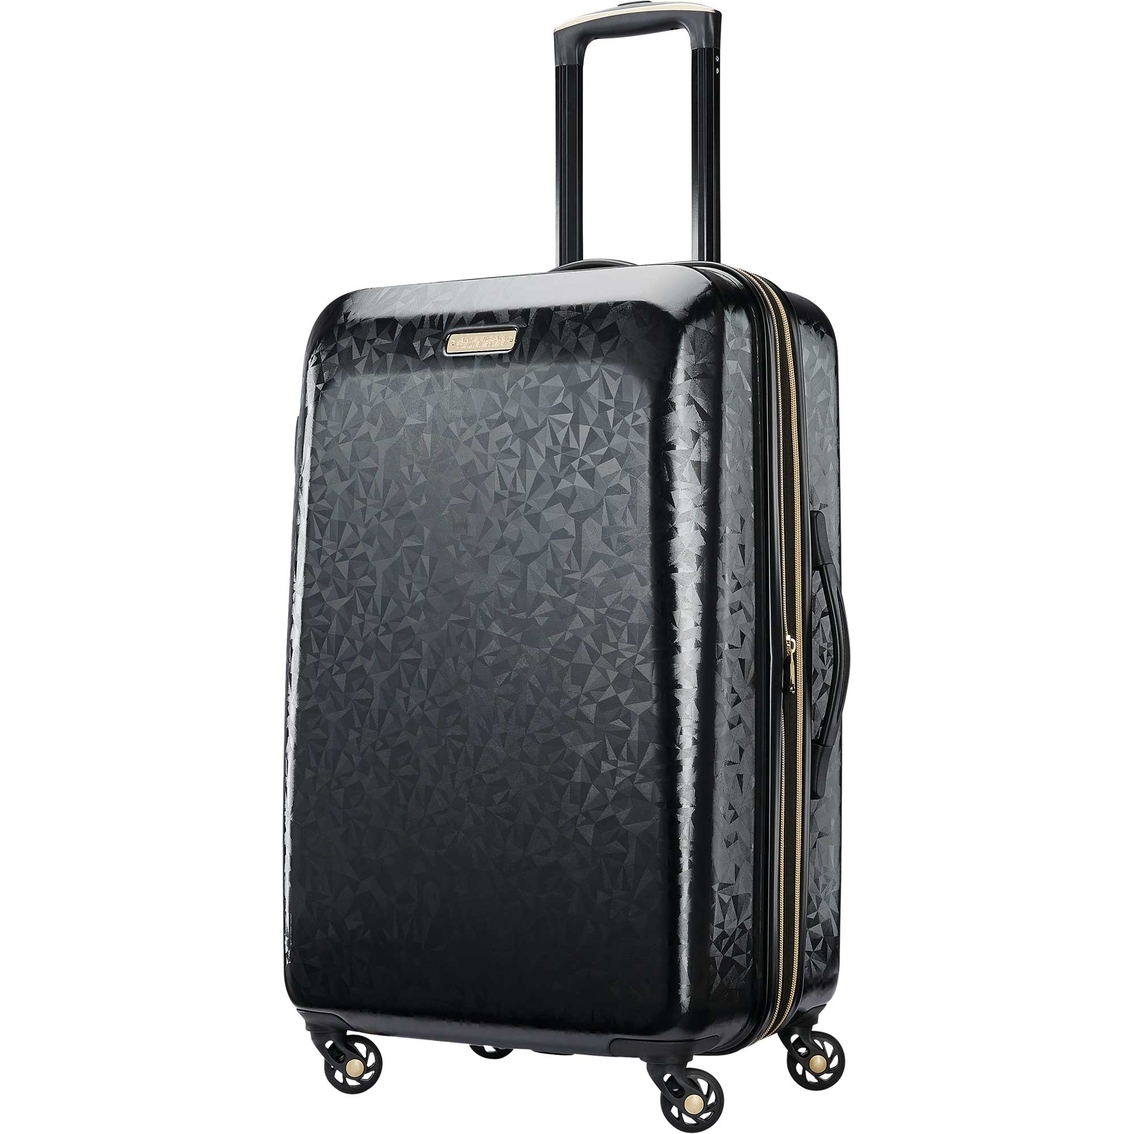 American Tourister Belle Voyage Hardside Spinner | Luggage | Clothing ...